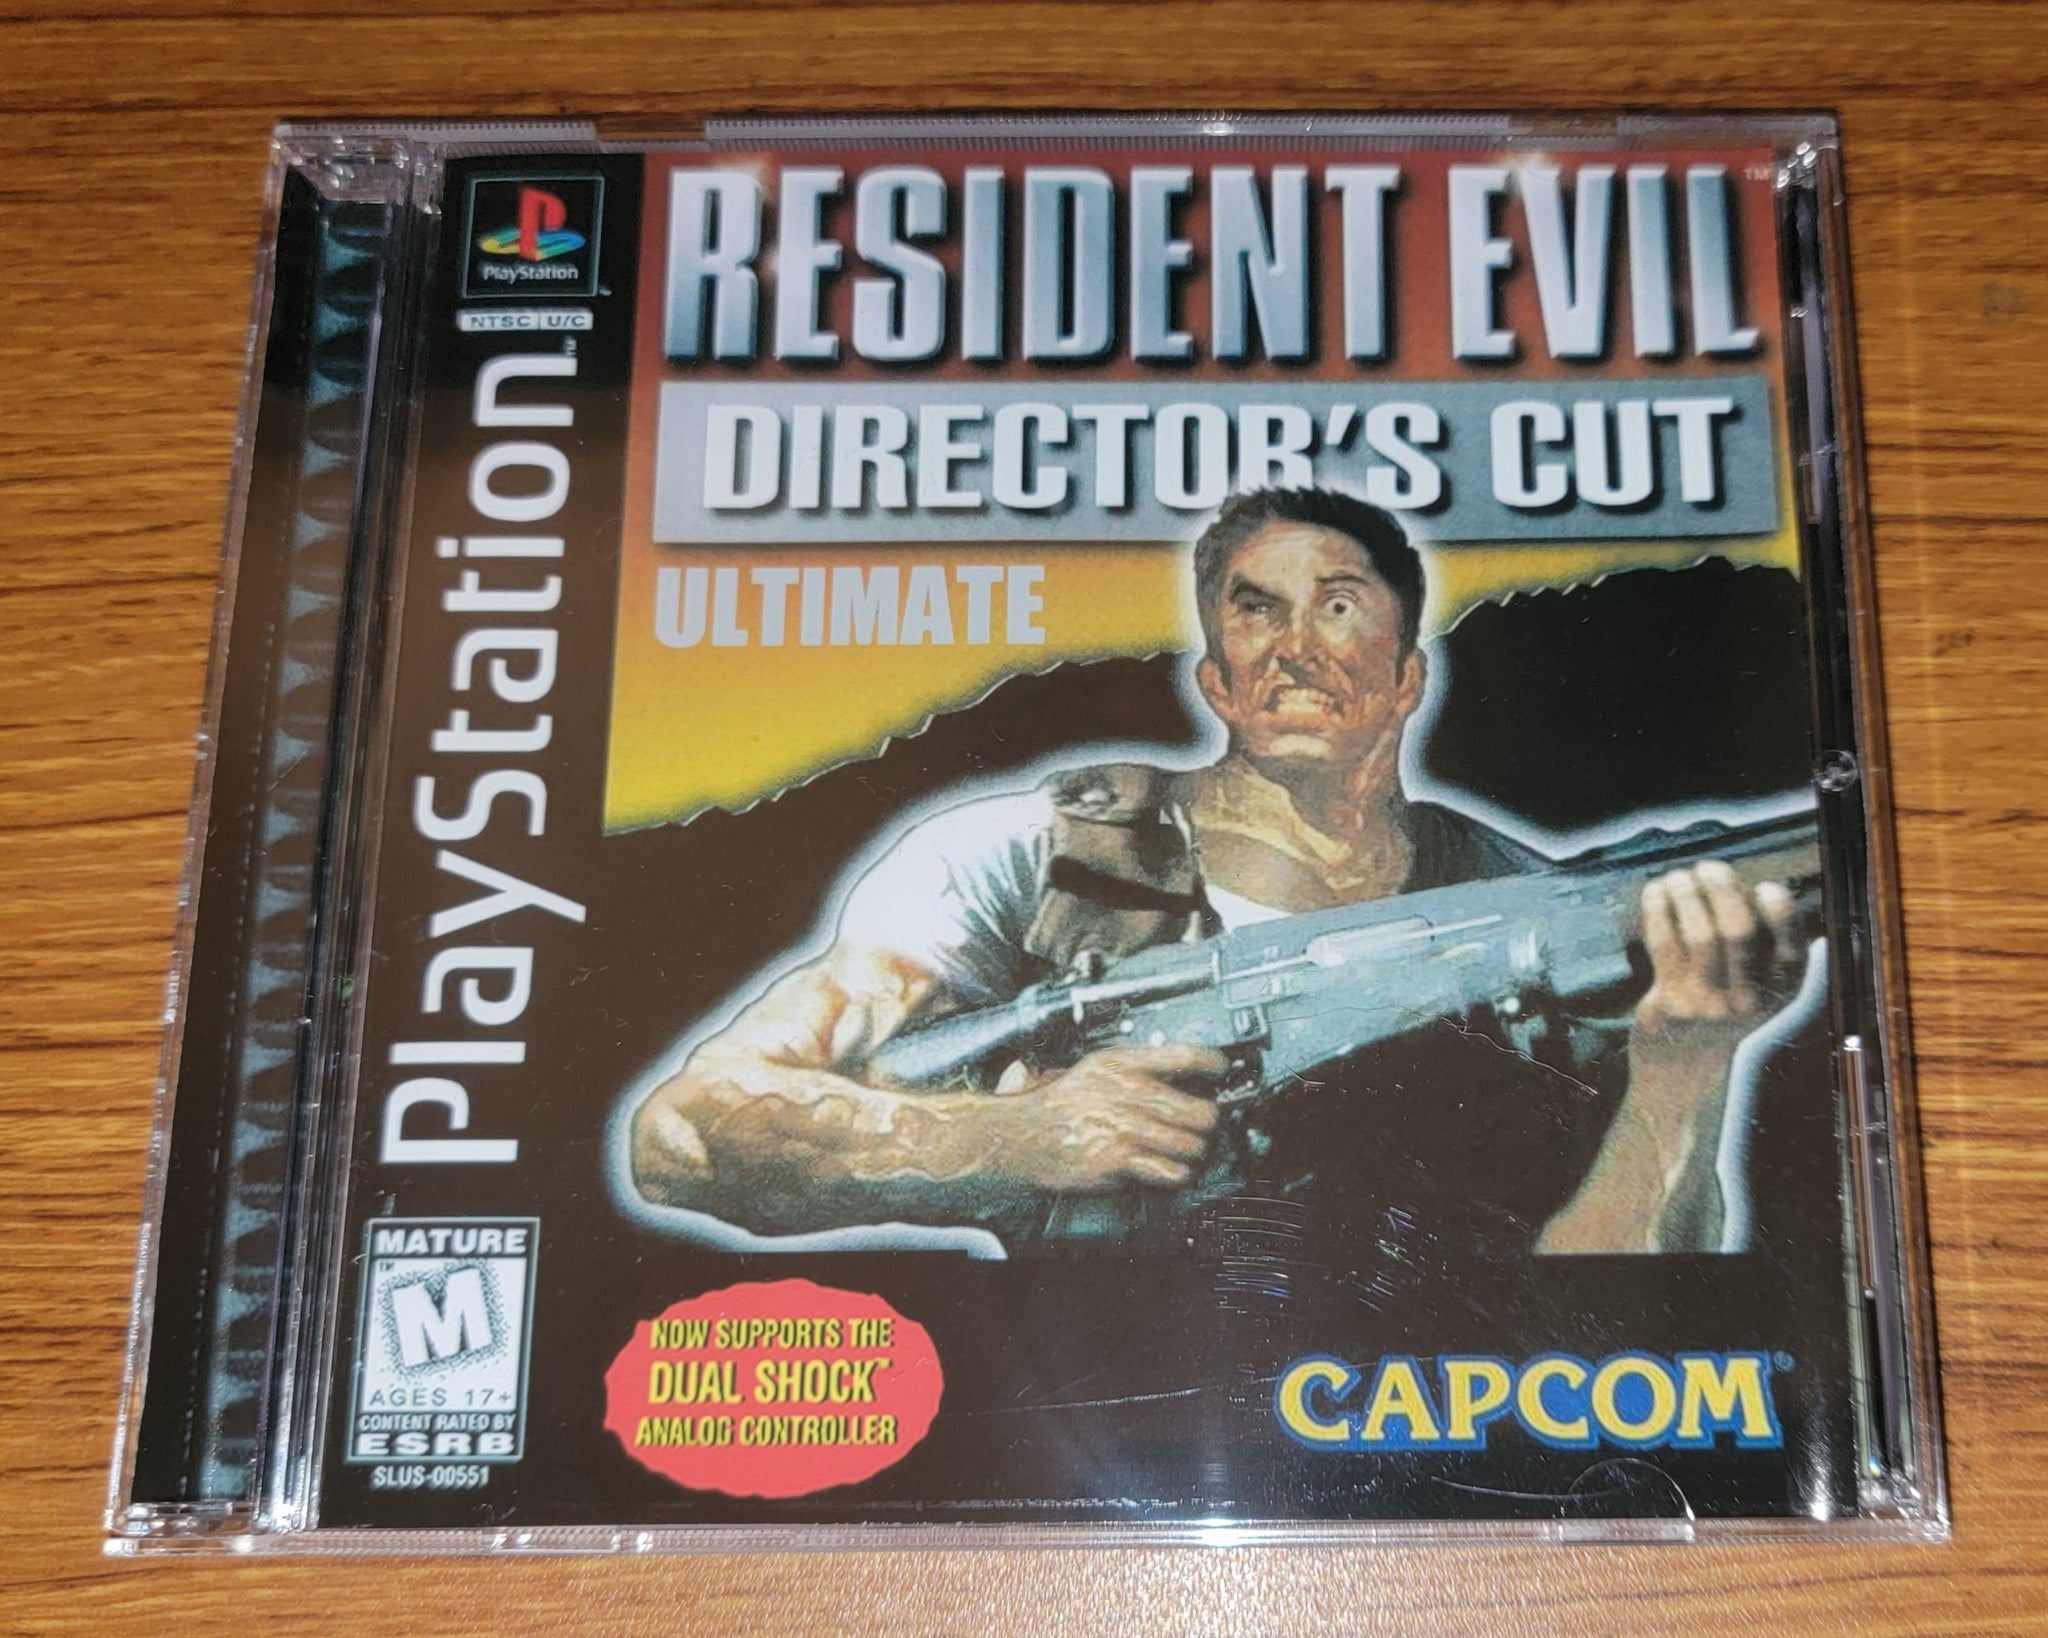 Resident Evil Playstation 1 reproduction